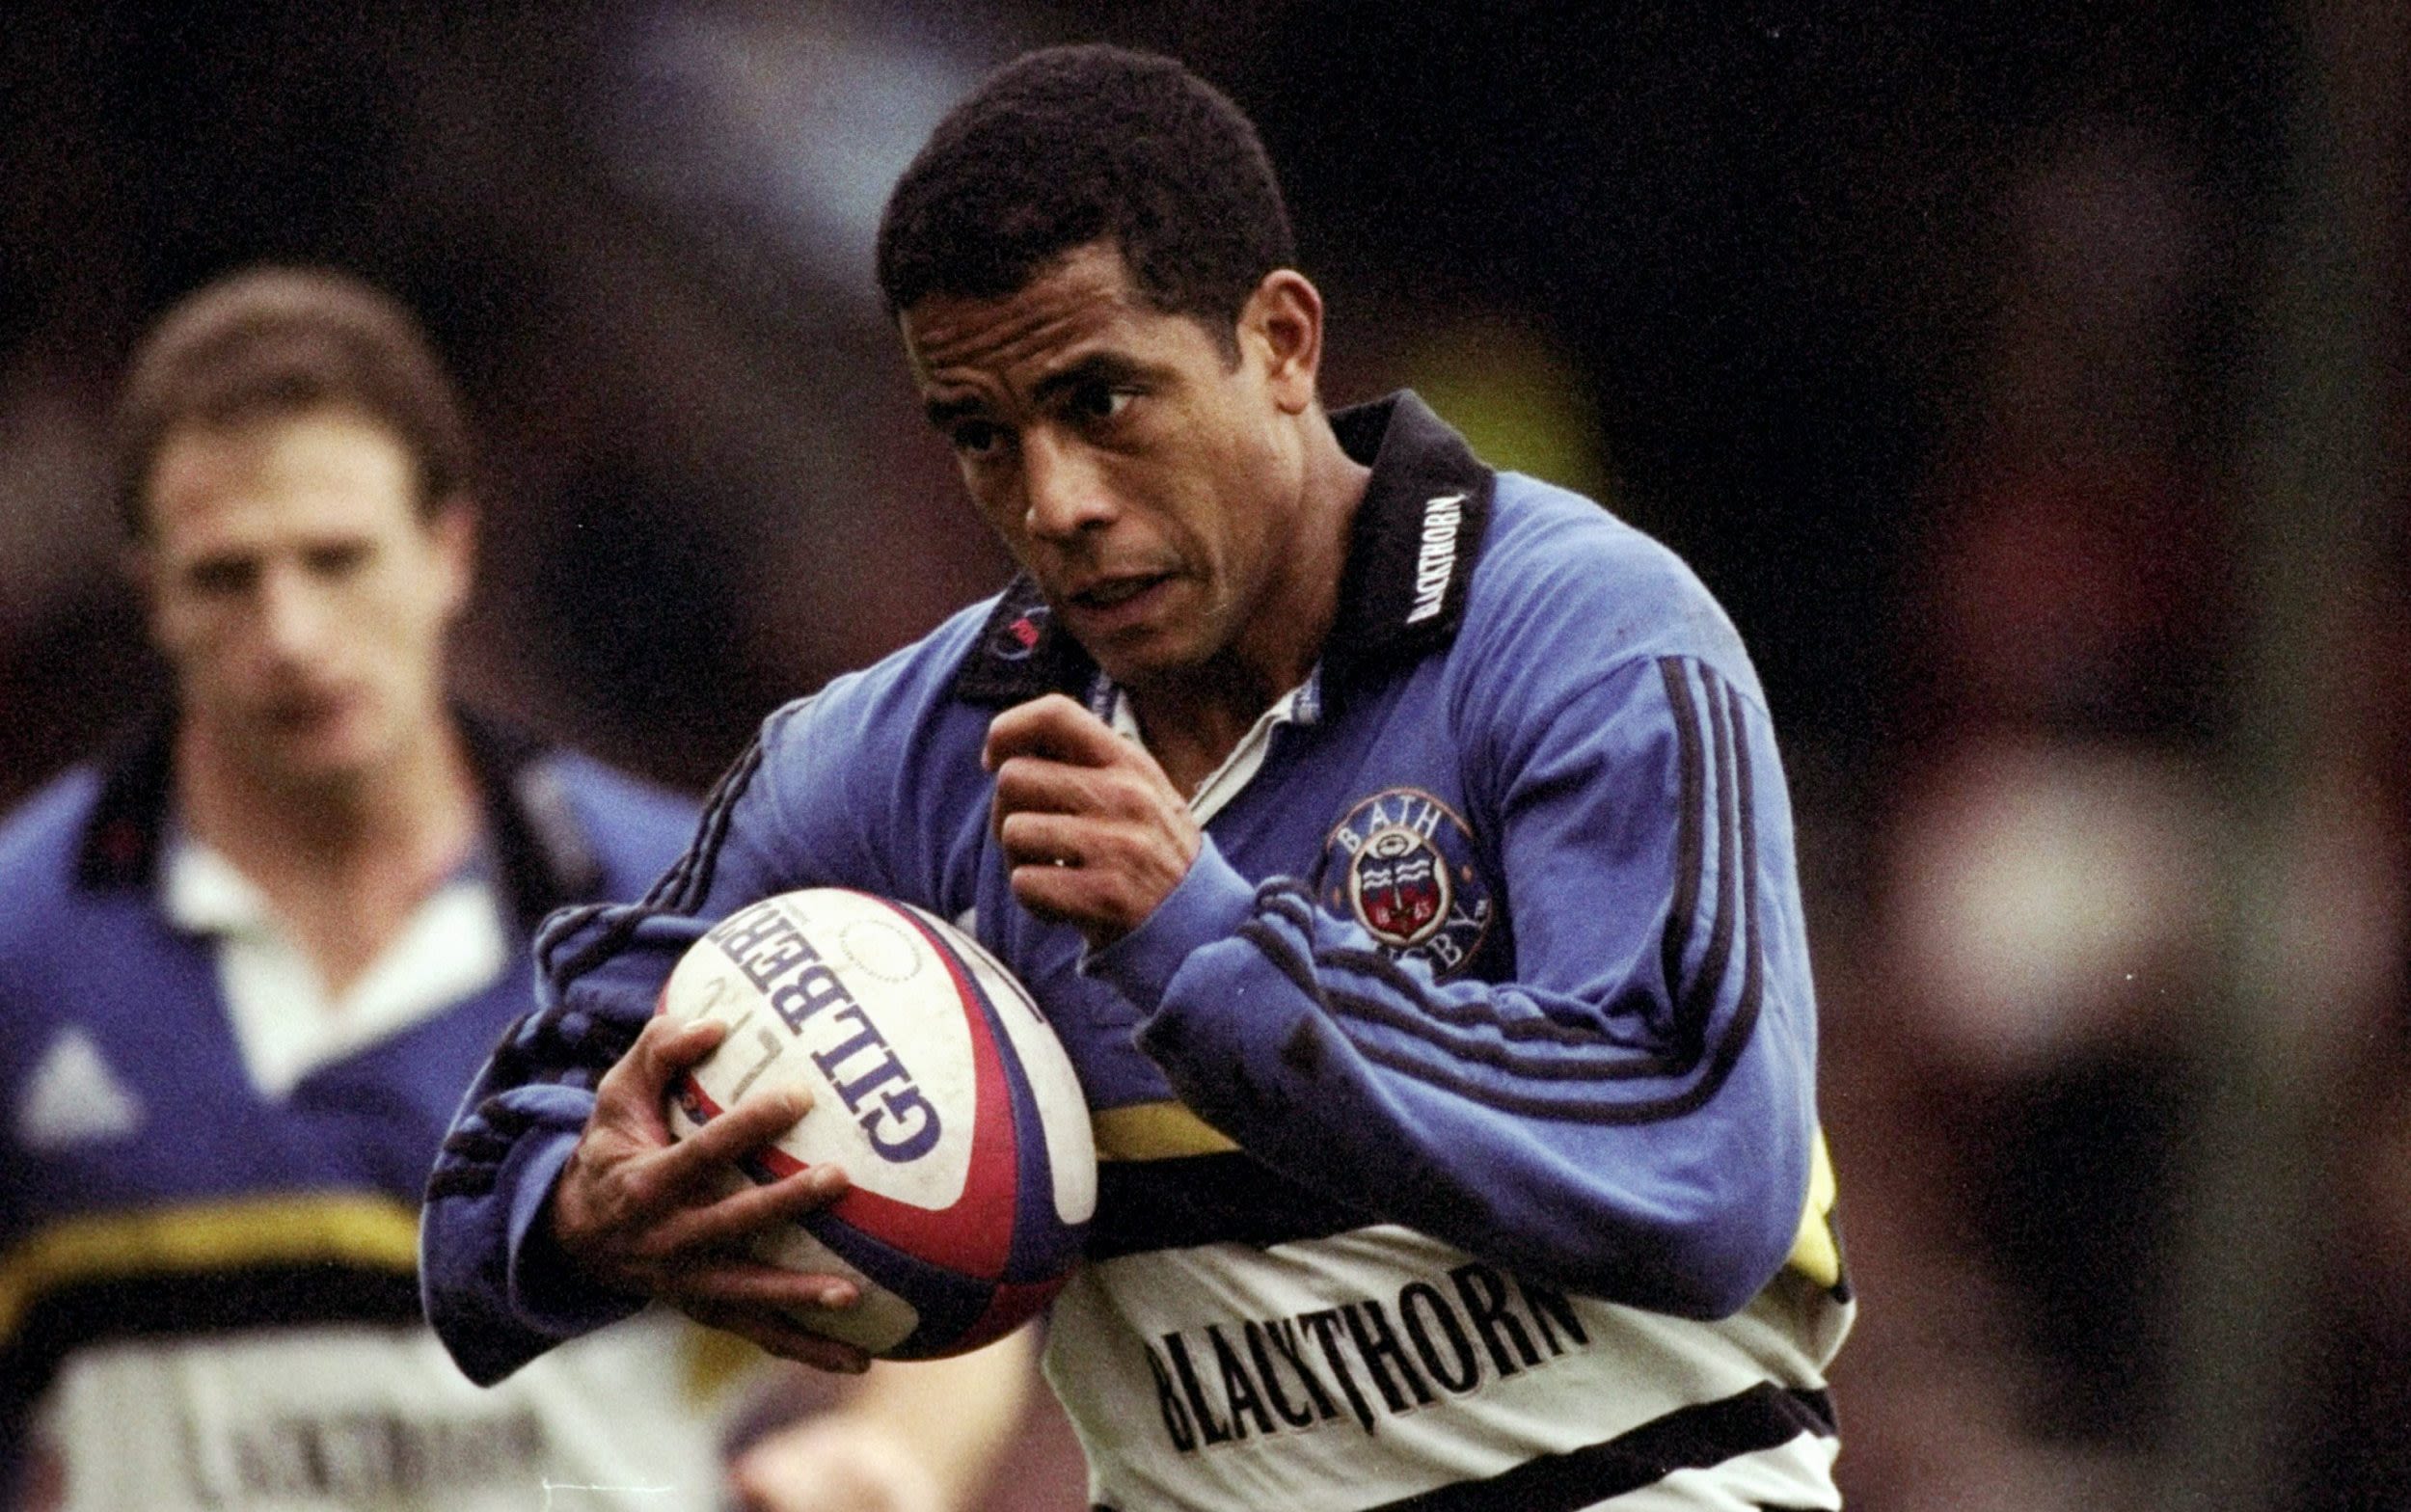 Jeremy Guscott: I’m on a bus to the final with childhood friends – the Bath buzz is back